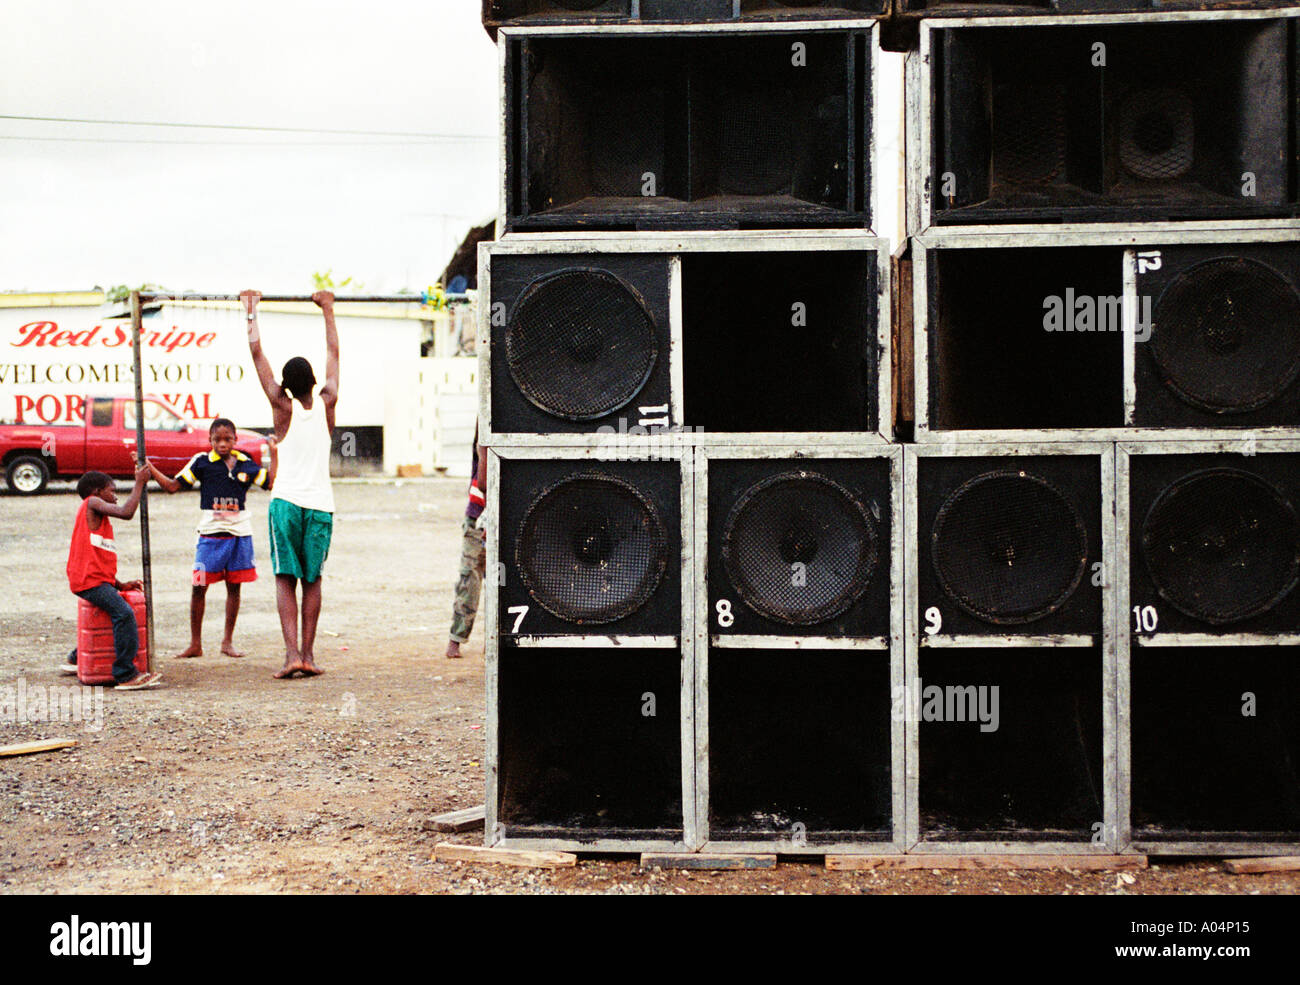 Kids playing near some speakers at Port Royal Kingston Jamaica Stock Photo